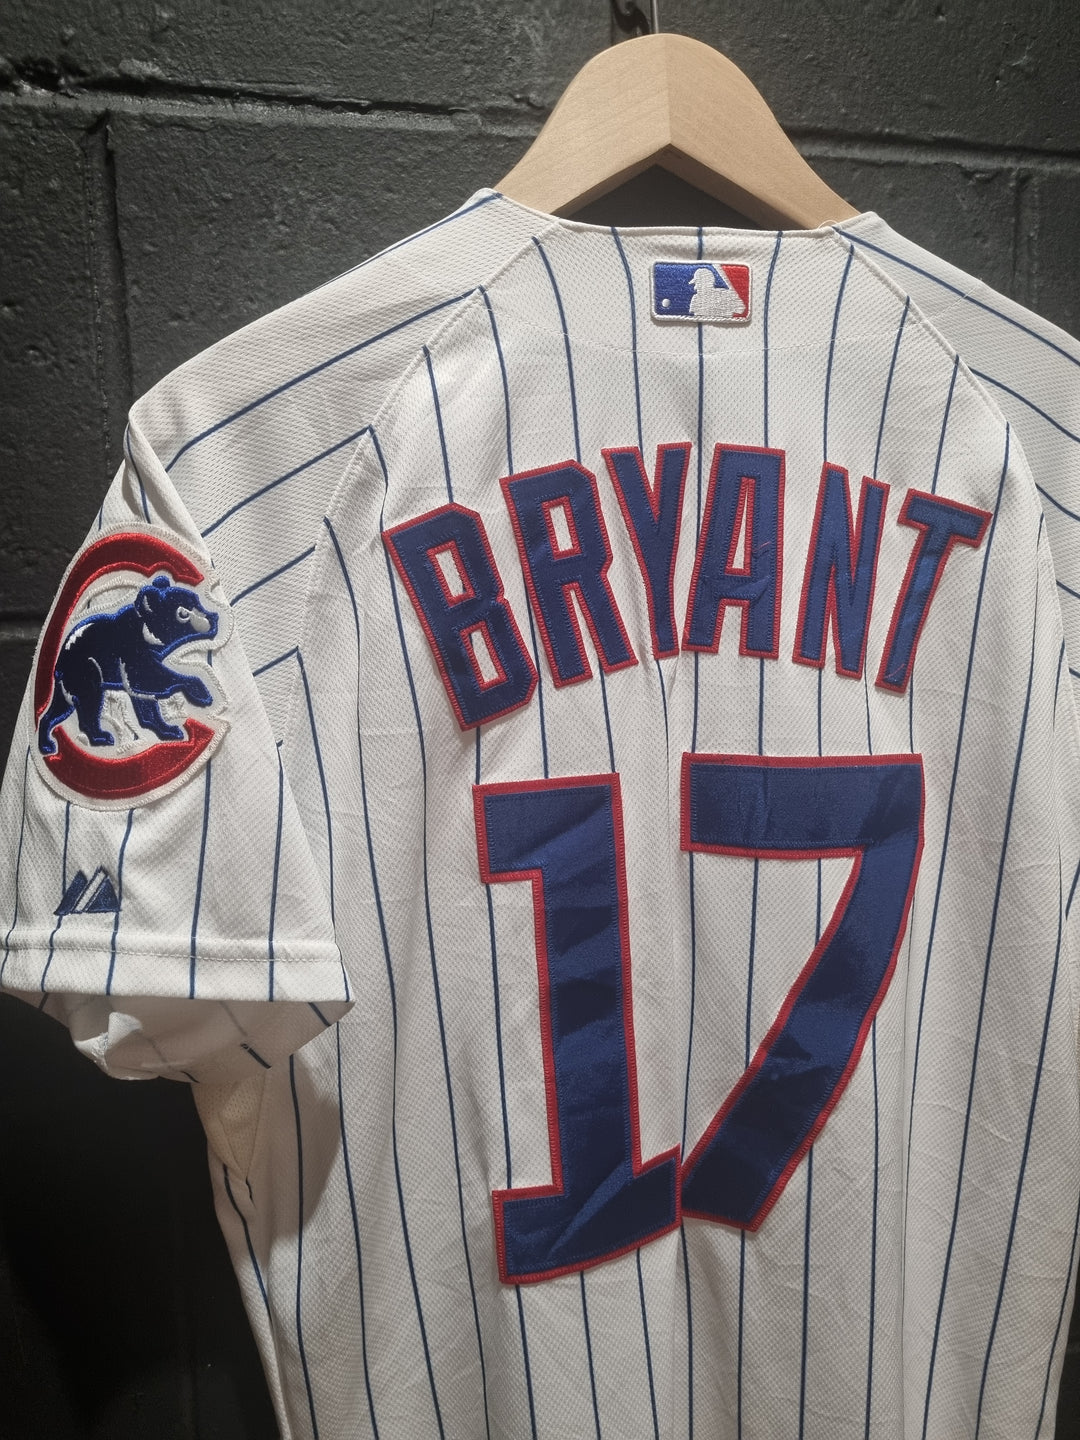 Chicago Cubs Bryant 40